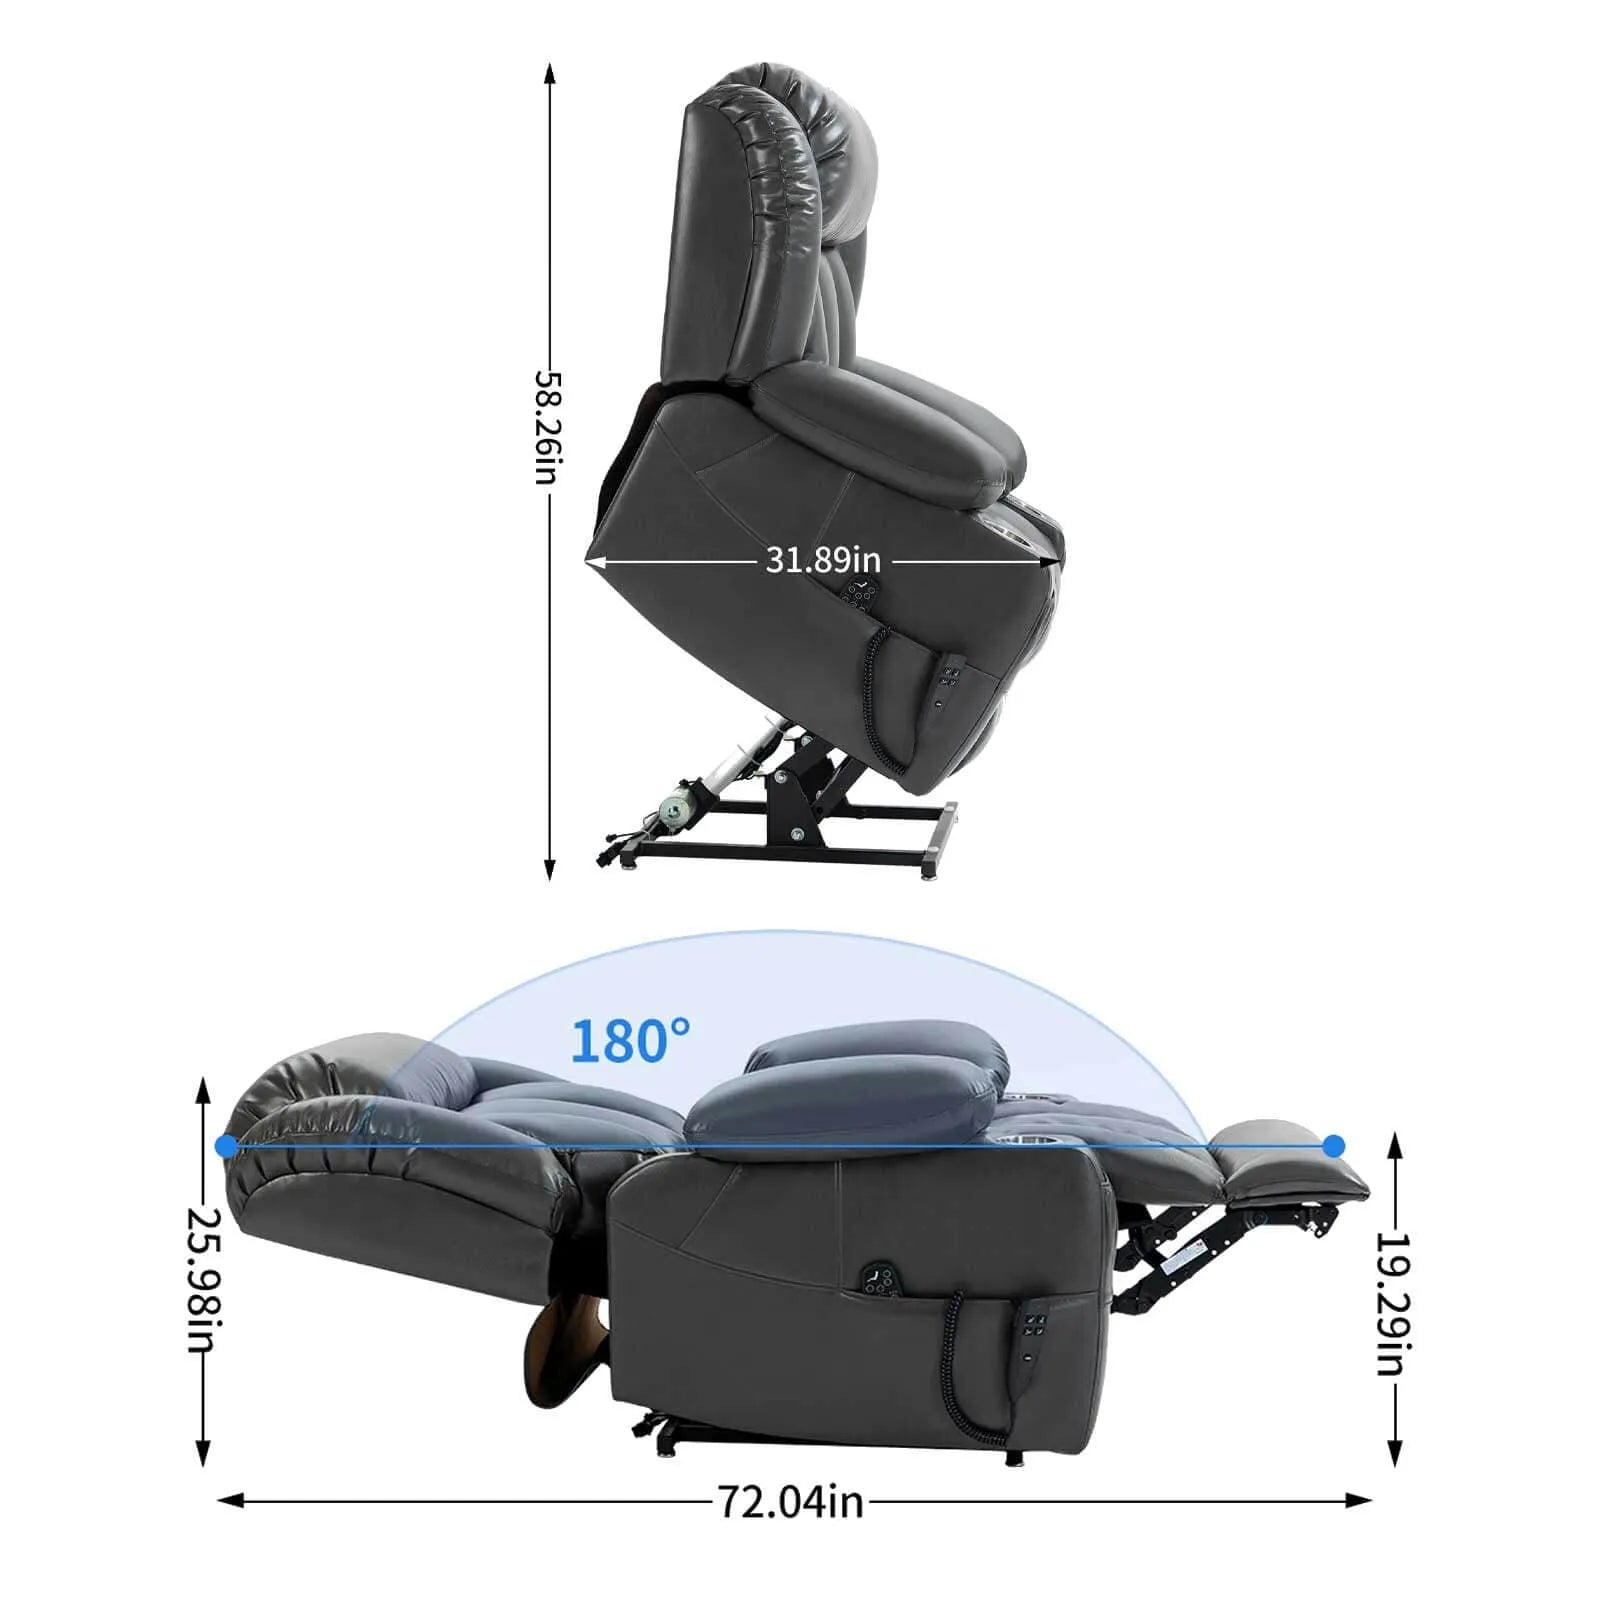 lay flat power lift recliner like a bed